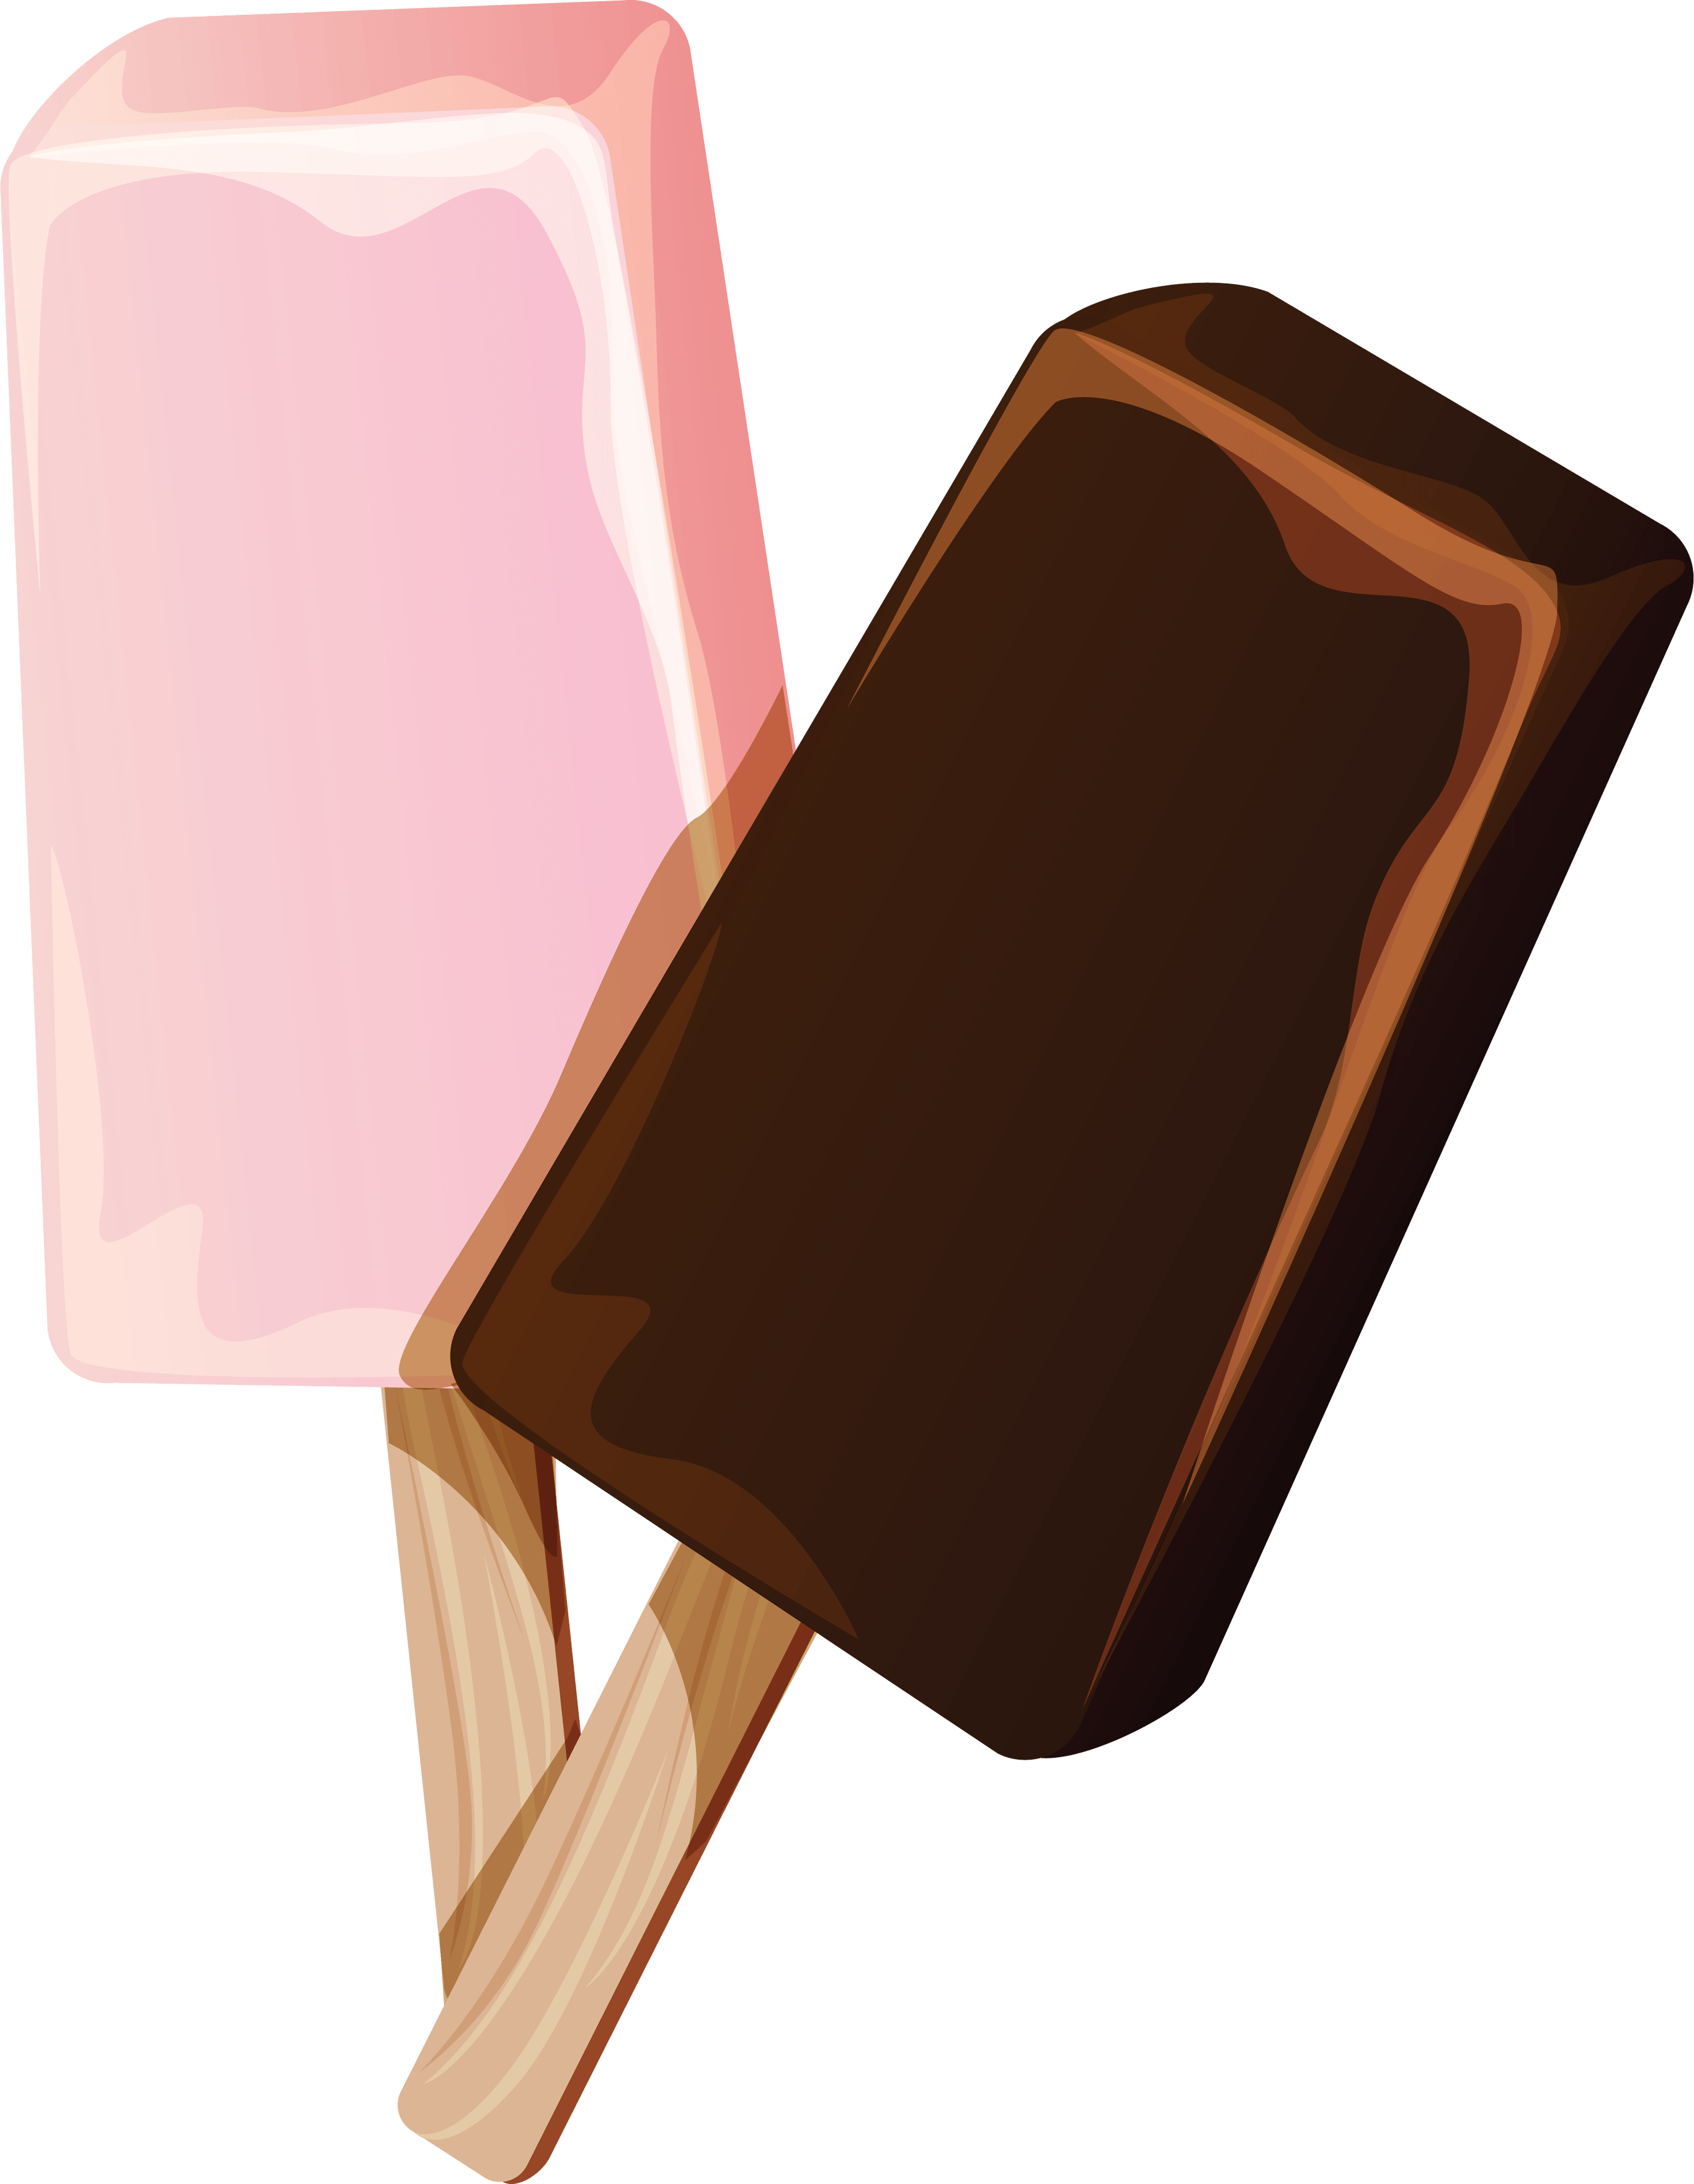 Ice Cream Png Image PNG Image